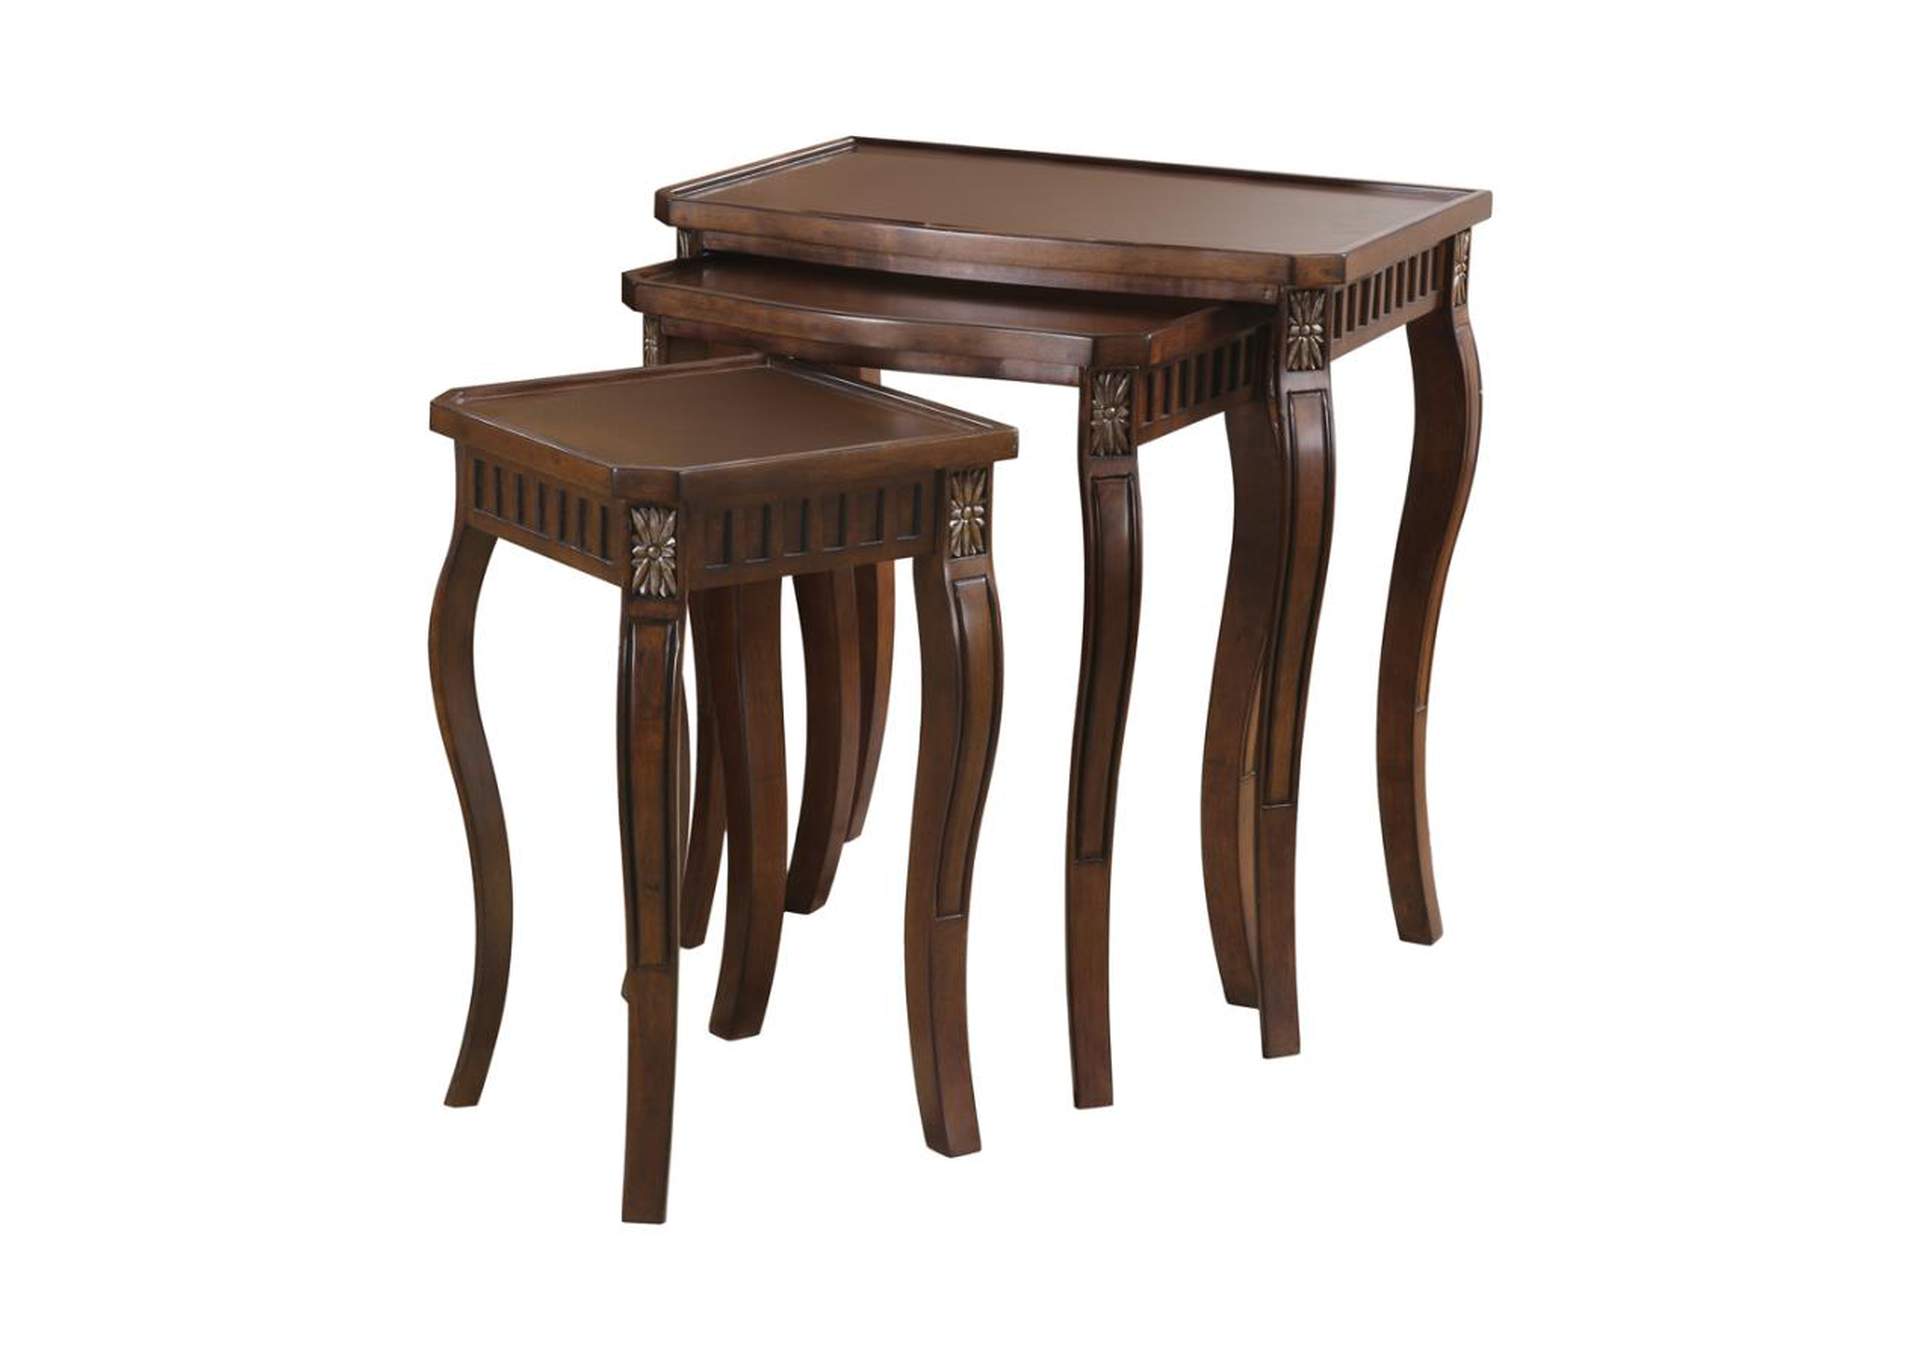 Daphne 3-Piece Curved Leg Nesting Tables Warm Brown,Coaster Furniture